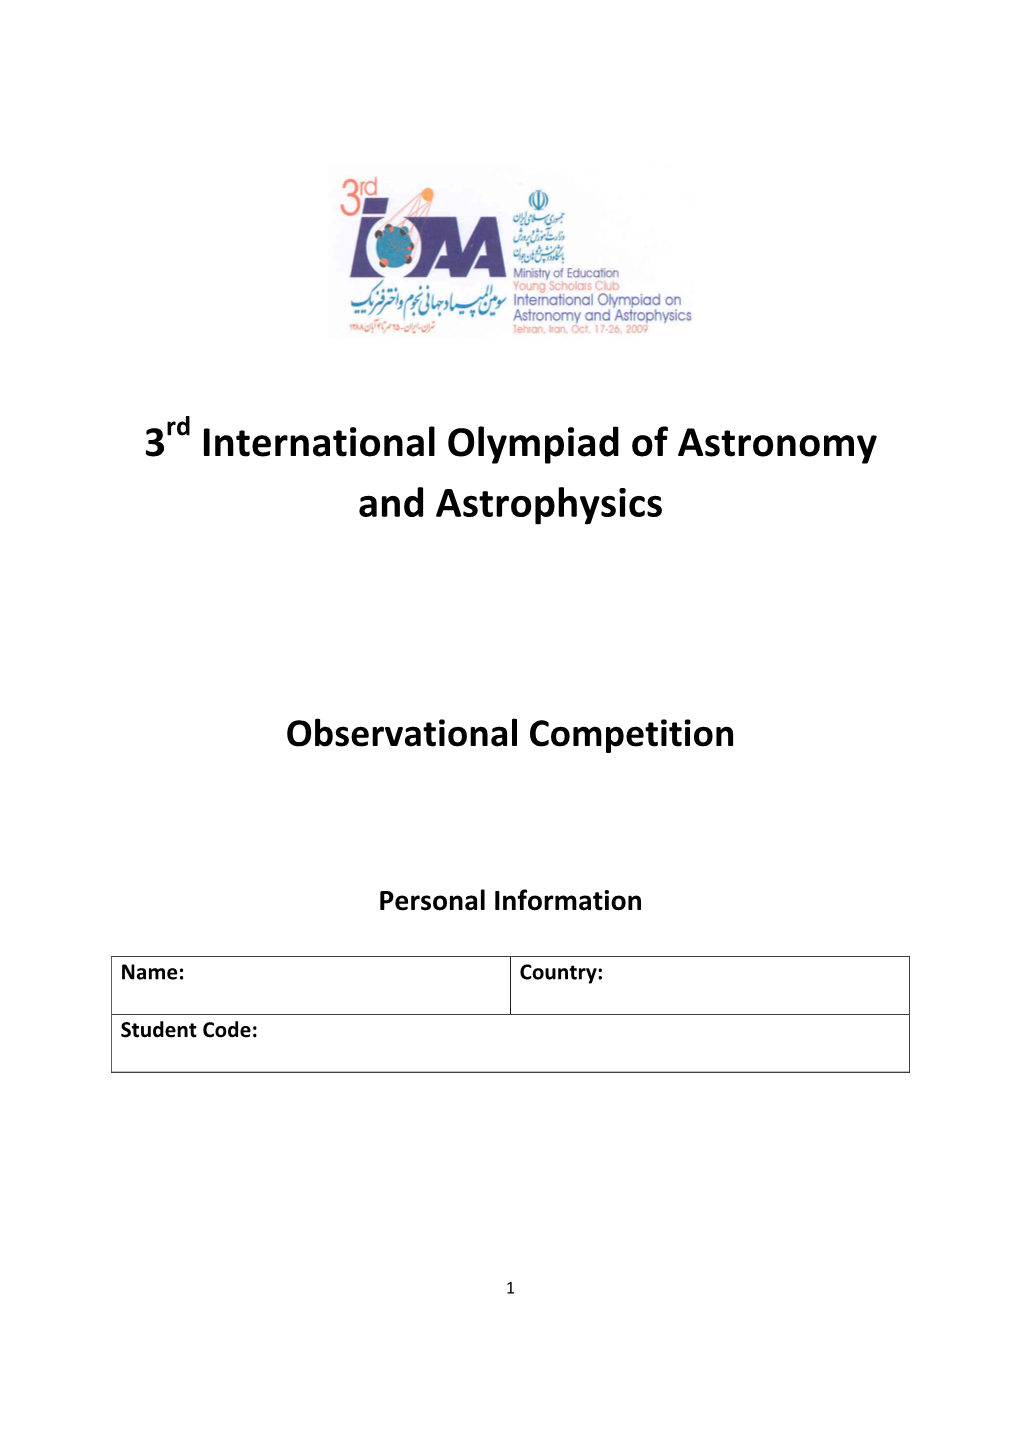 3 International Olympiad of Astronomy and Astrophysics